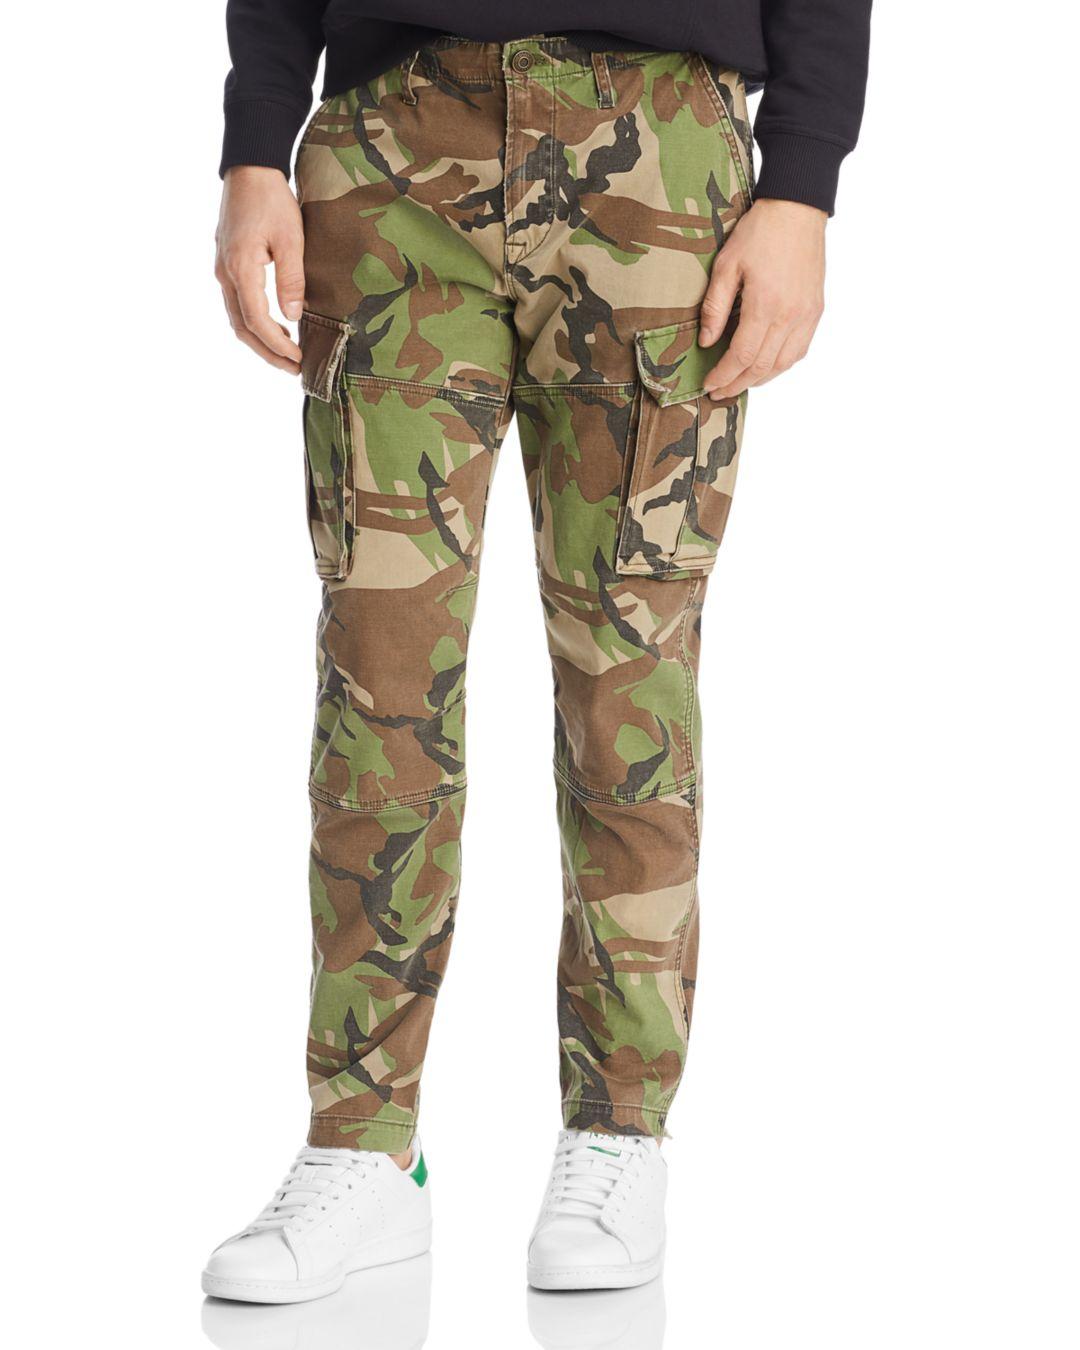 Hudson Jeans Skinny Fit Cargo Pants In British Camo in Green for Men - Lyst